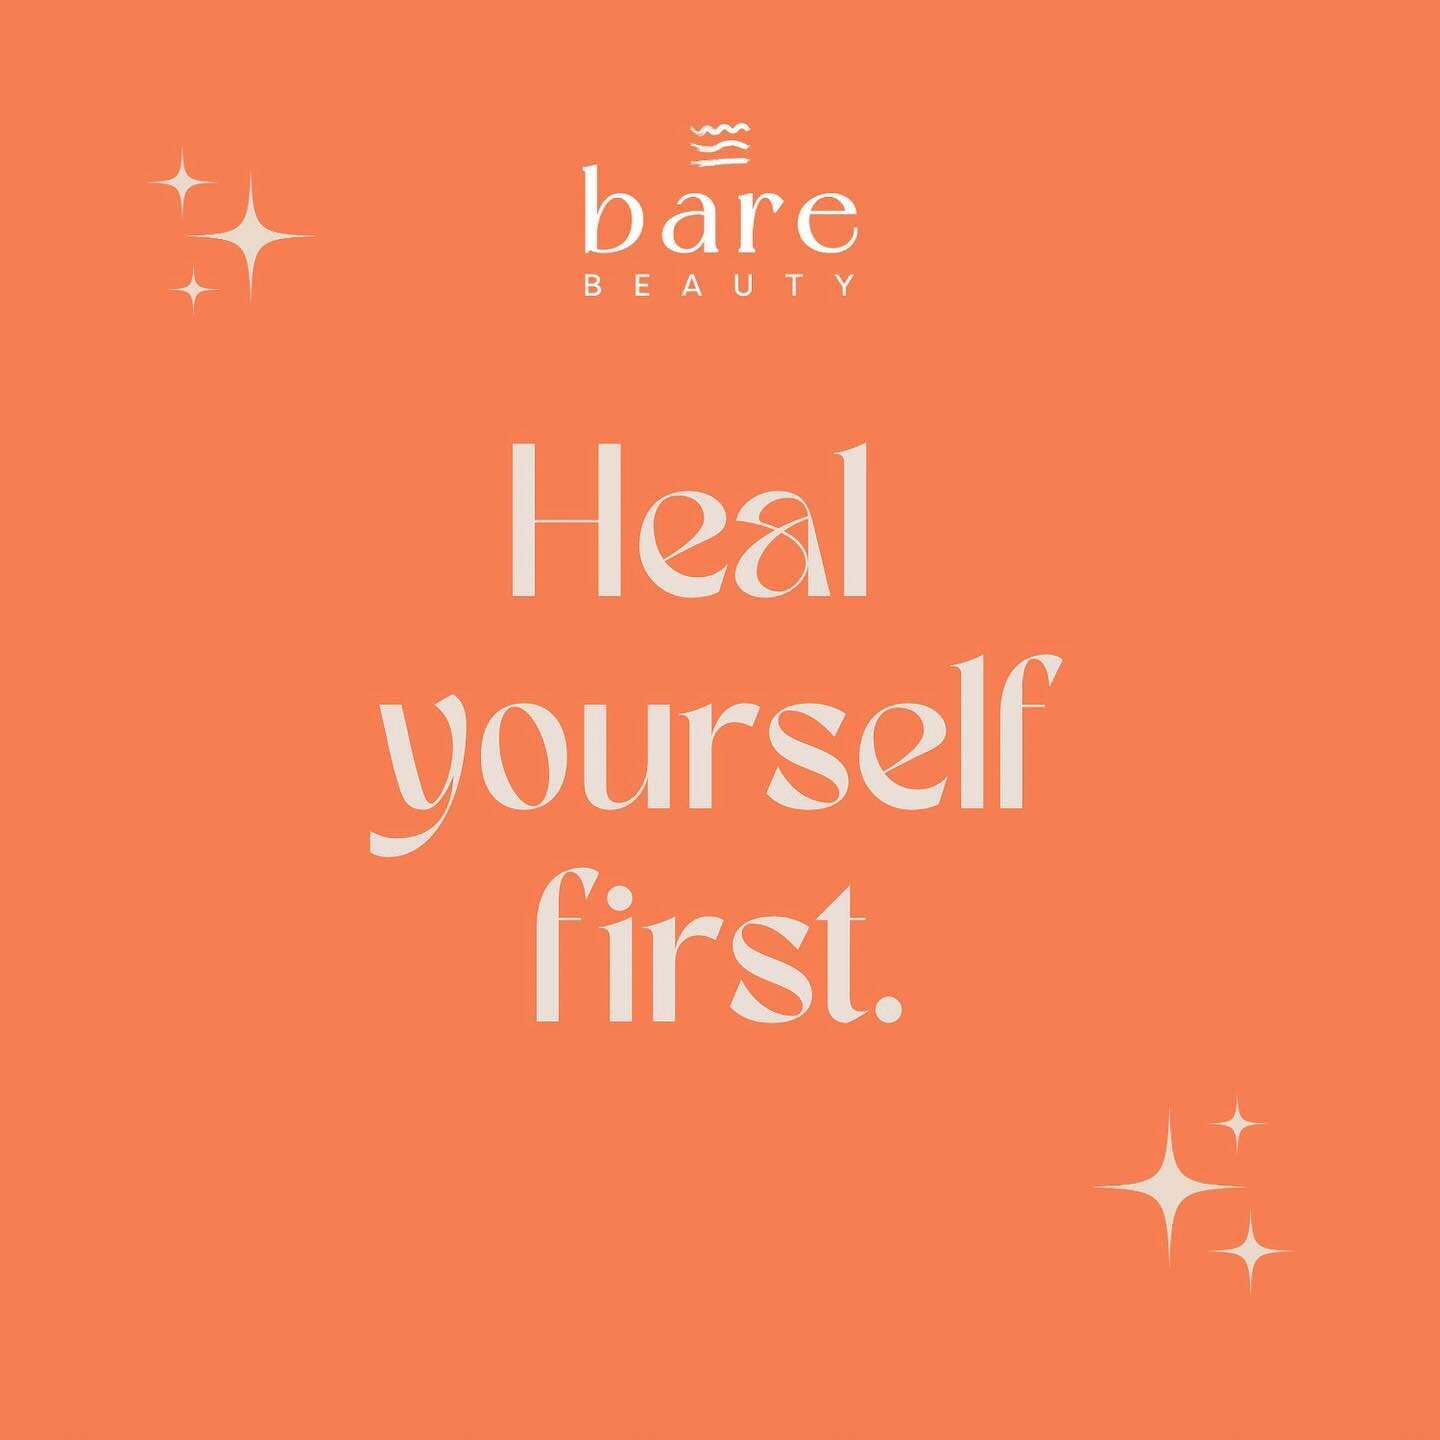 Fill your cup first 💕
.
Self care can look like a million things, find something that work for you and give it a go!! 
.
#selfcare #selflove #loveyou #pdx #portland